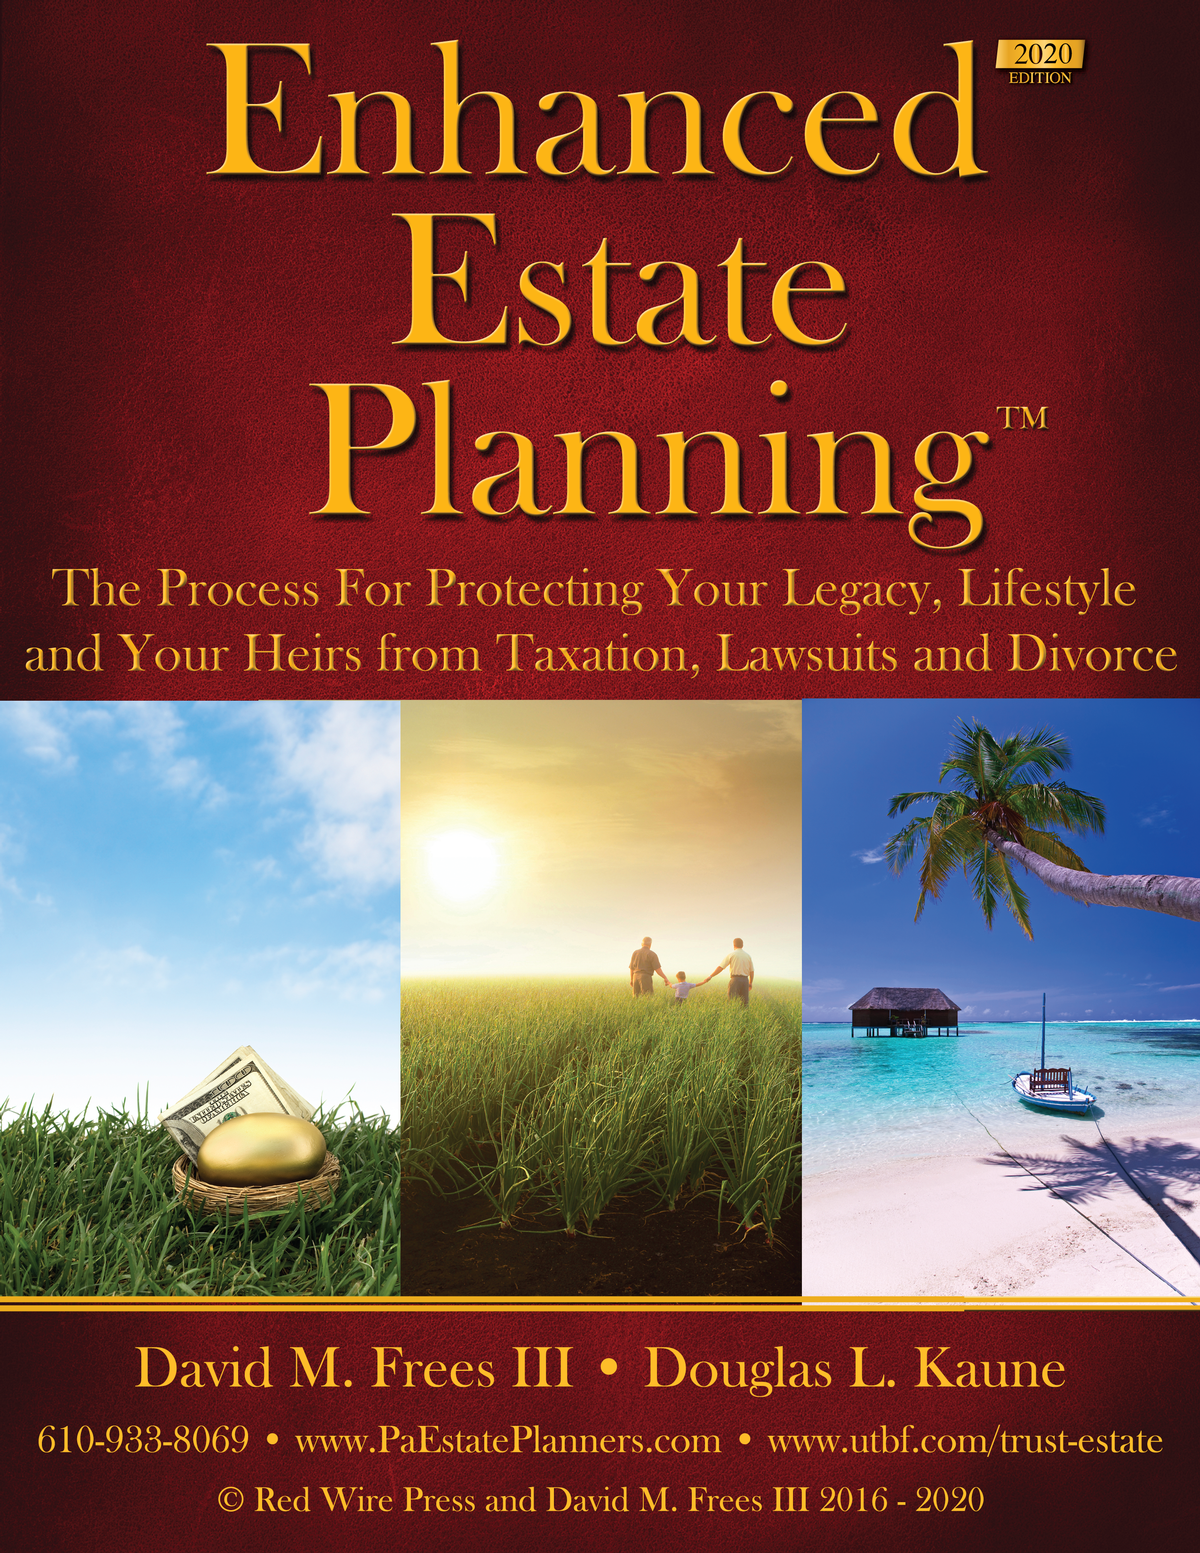 Enhanced Estate Planning: Protecting Your Legacy 2020 Ed.